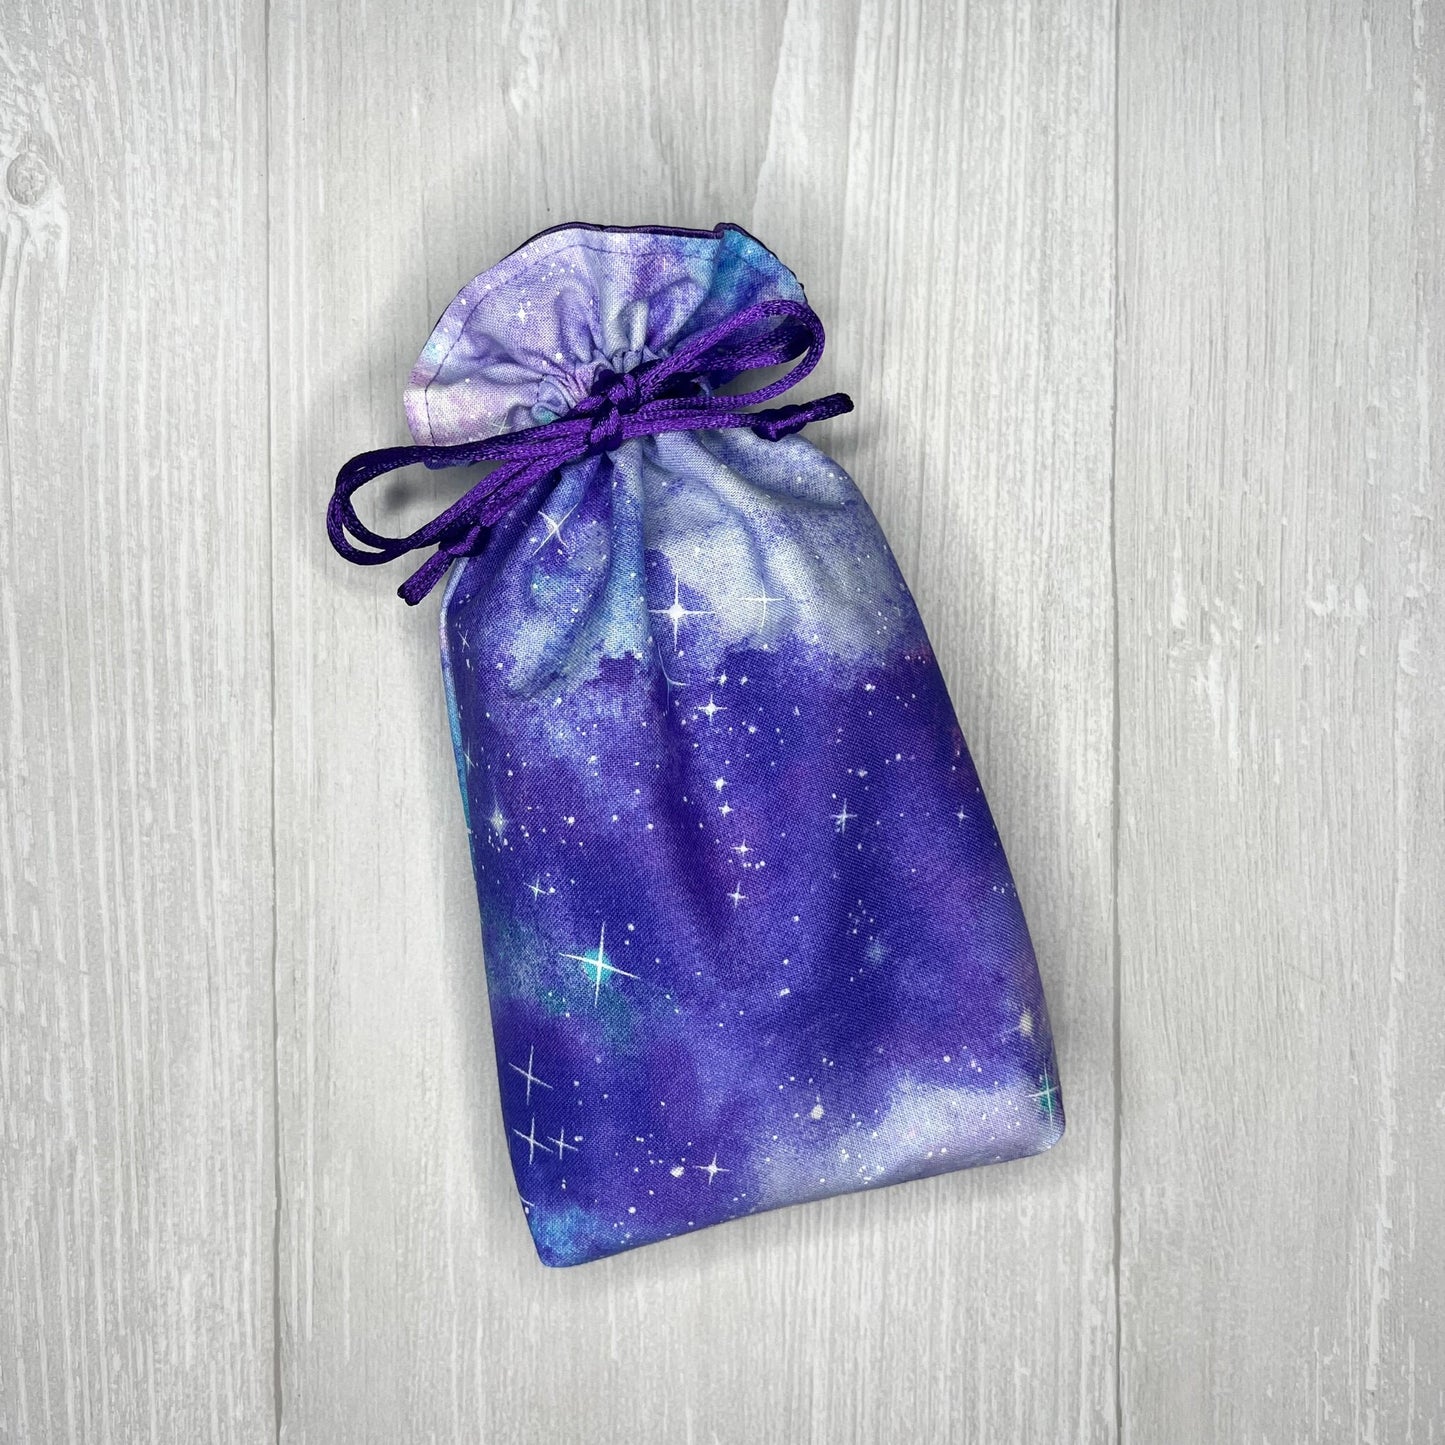 Galactic Tarot Bag, Purple Drawstring Pouch, Pocket Tarot Deck Storage Holder, Pagan Witchcraft Wiccan Divination Tools Gifts & Supplies